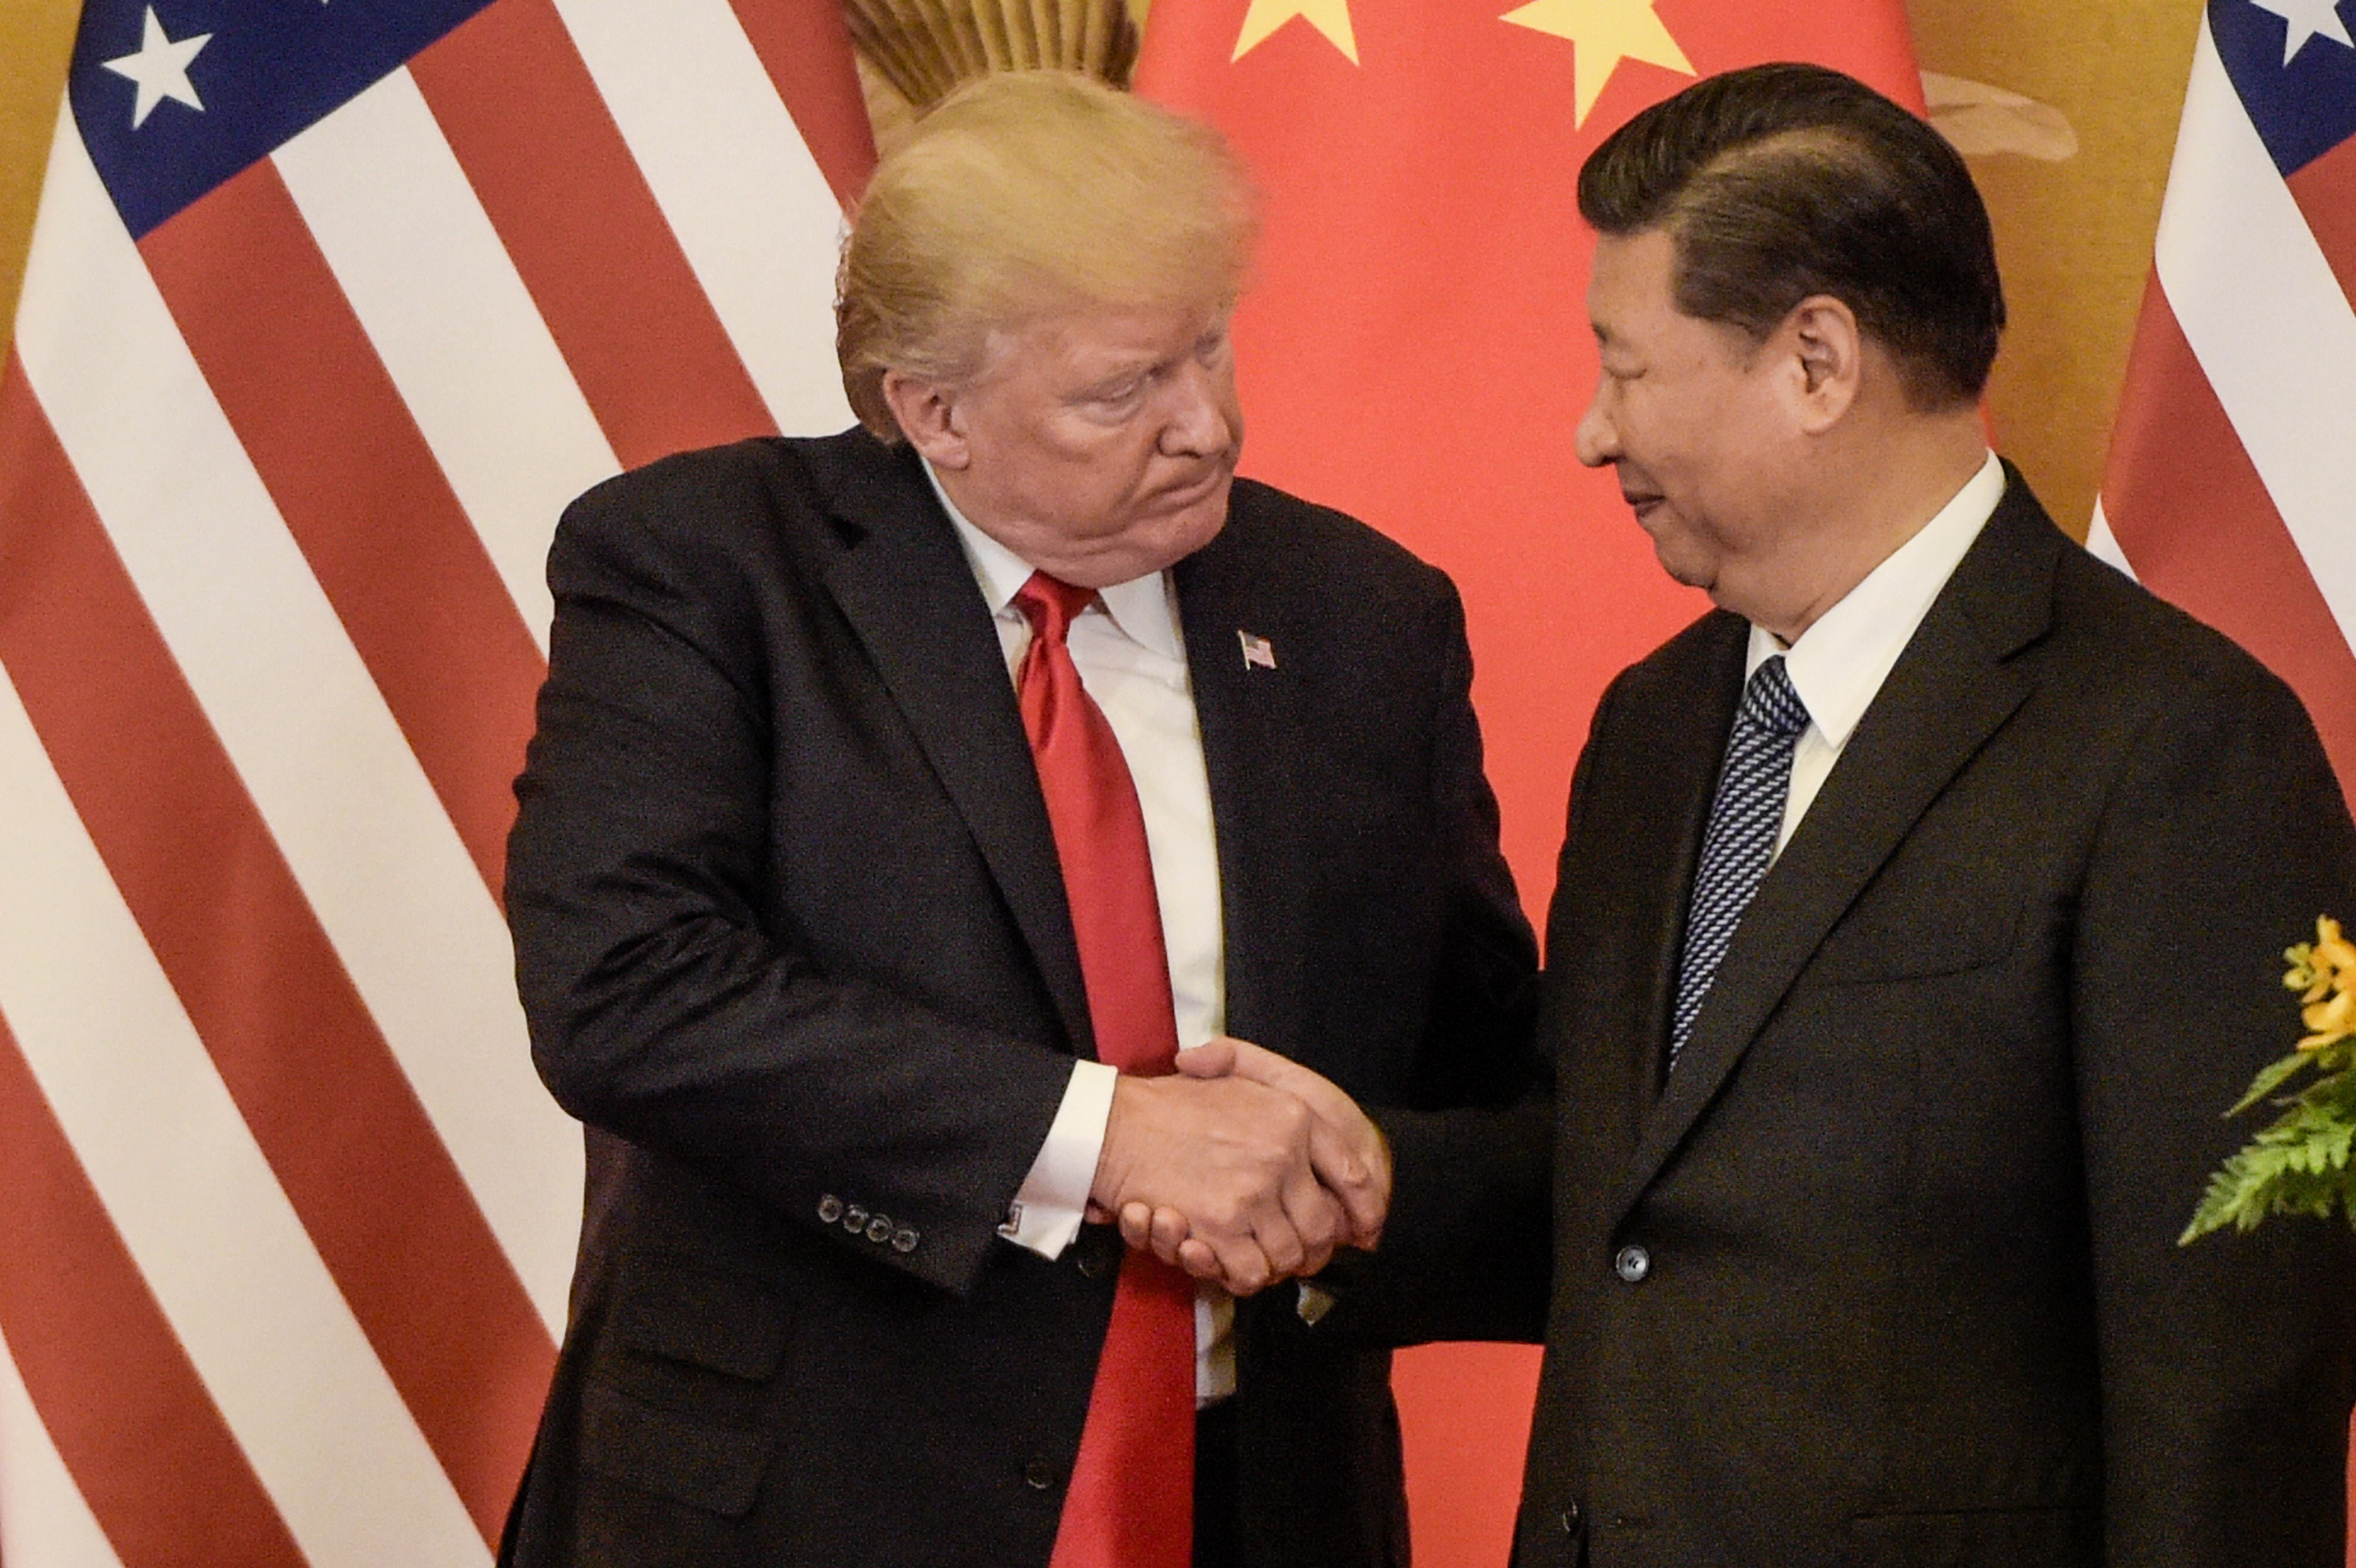 US President Donald Trump (L) shakes hand with China's President Xi Jinping at the end of a press conference at the Great Hall of the People in Beijing on November 9, 2017